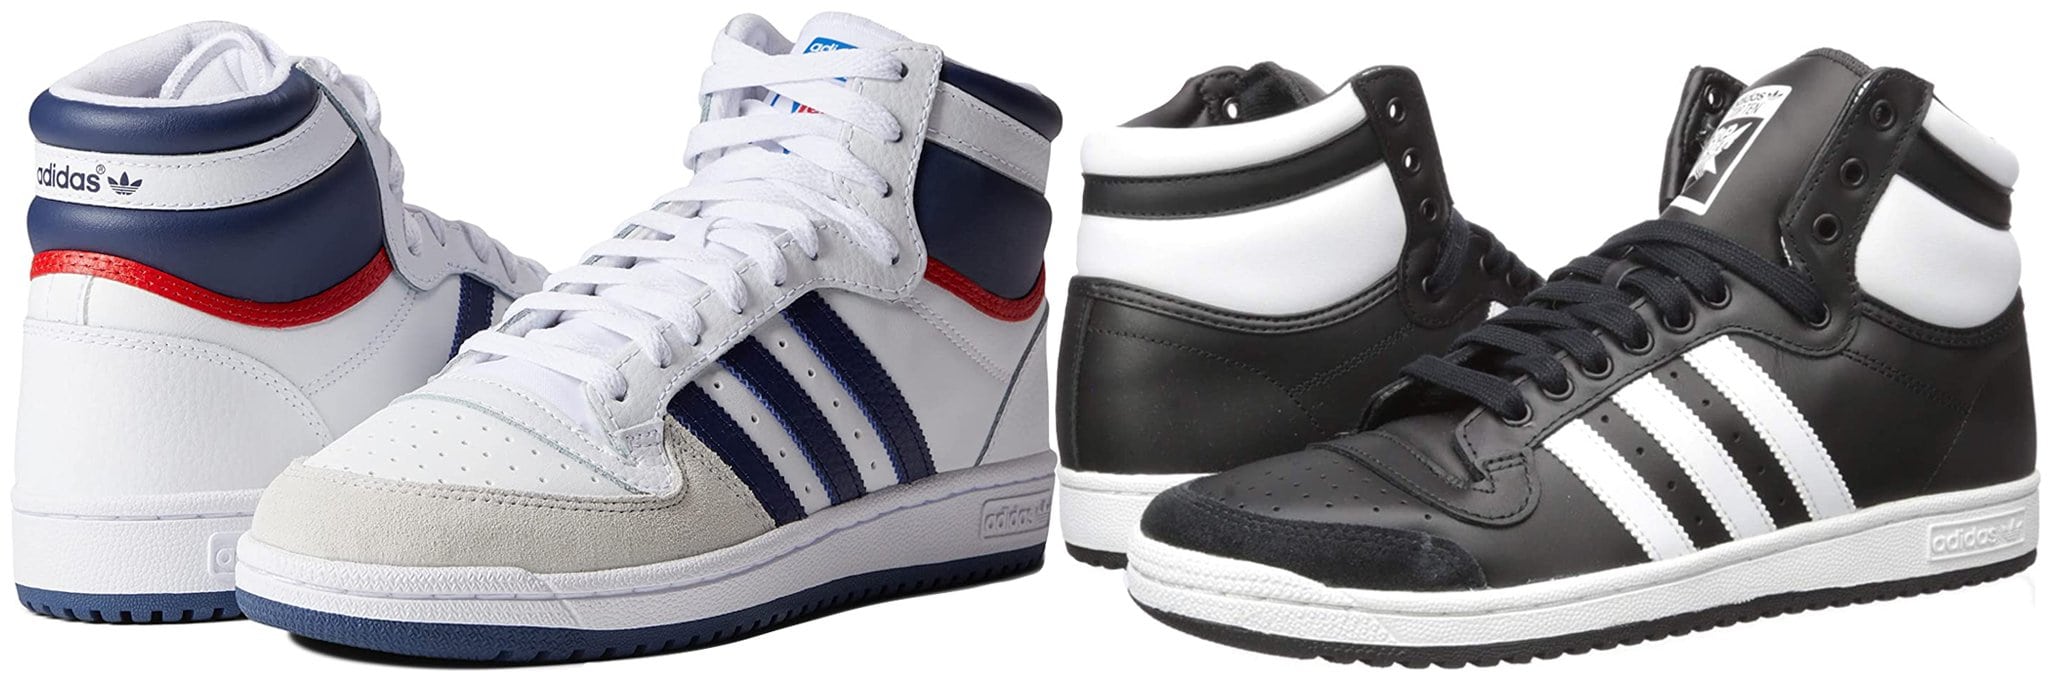 Adidas high-top sneakers are known for their stylish designs, comfortable fit, and high-quality materials